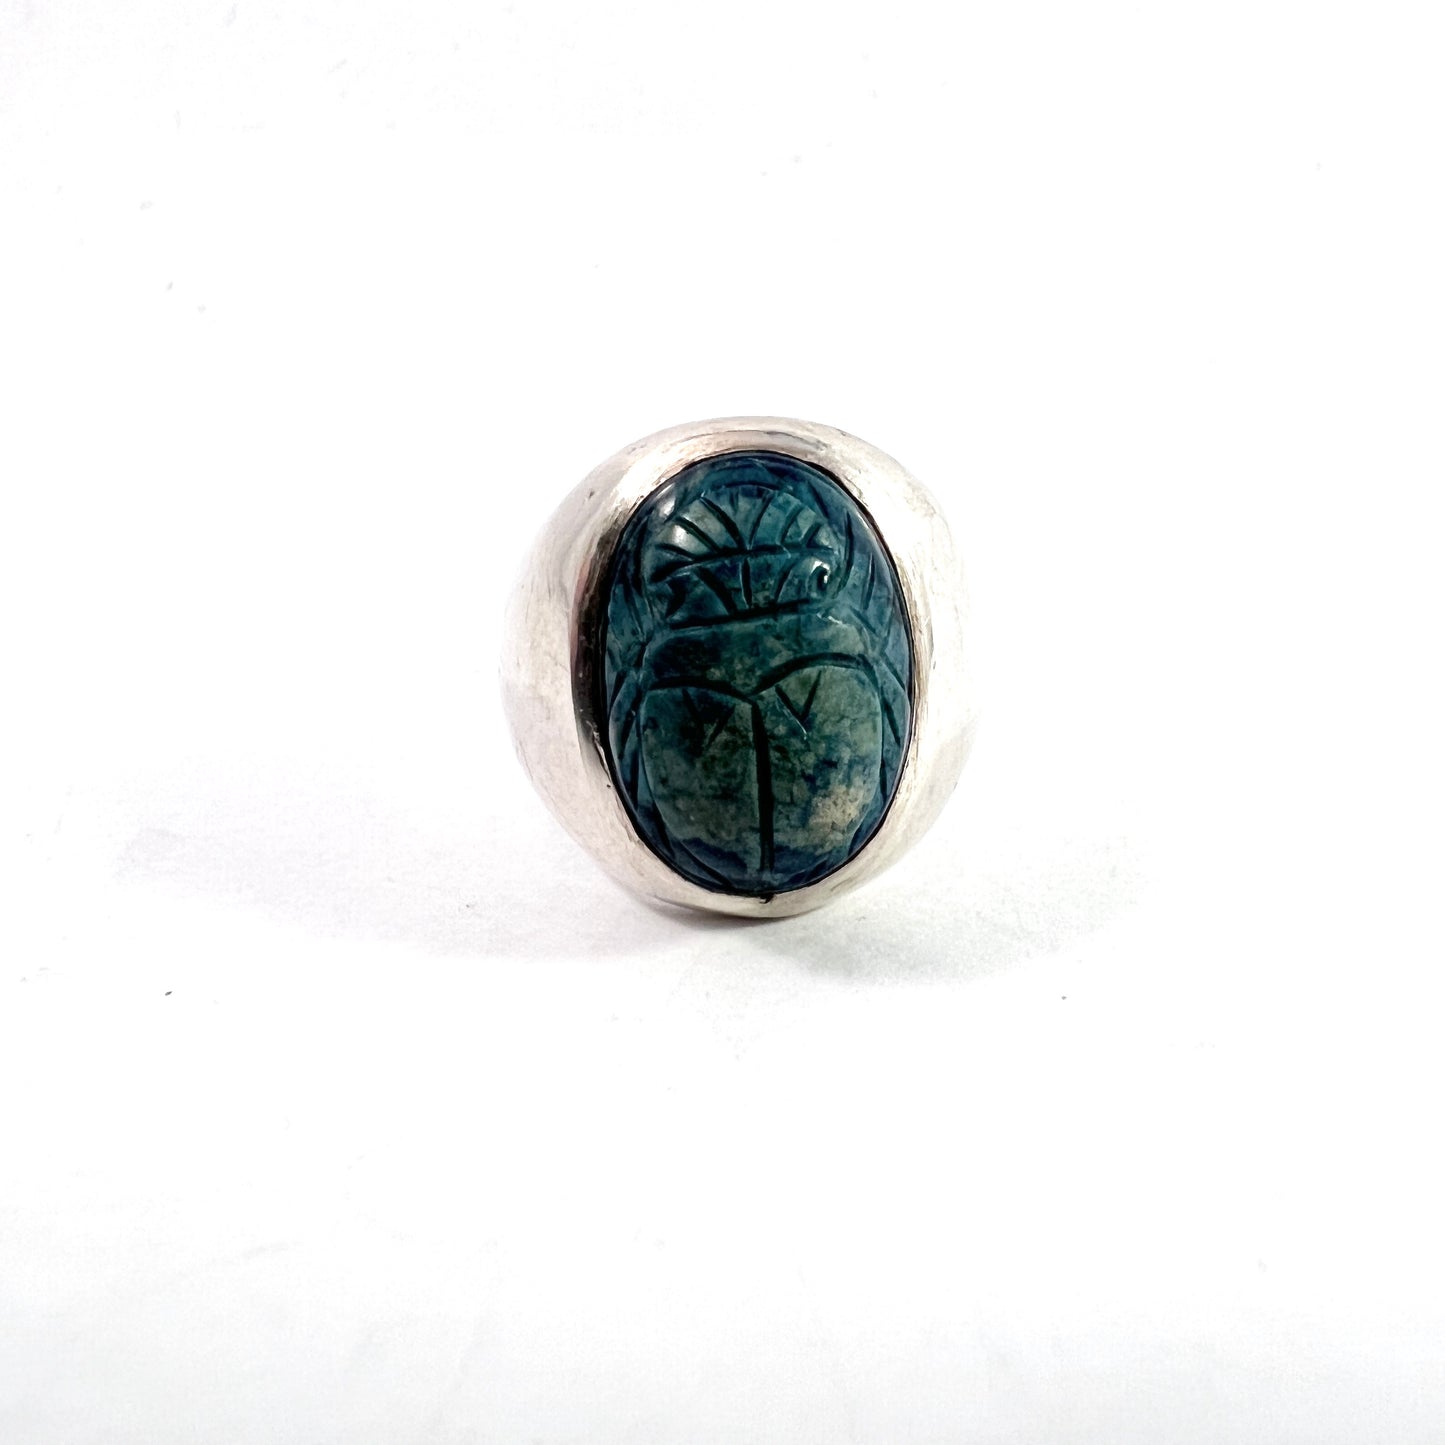 Swedish Import by G Sandqvist c 1950s Egyptian Faience Scarab Silver Ring.